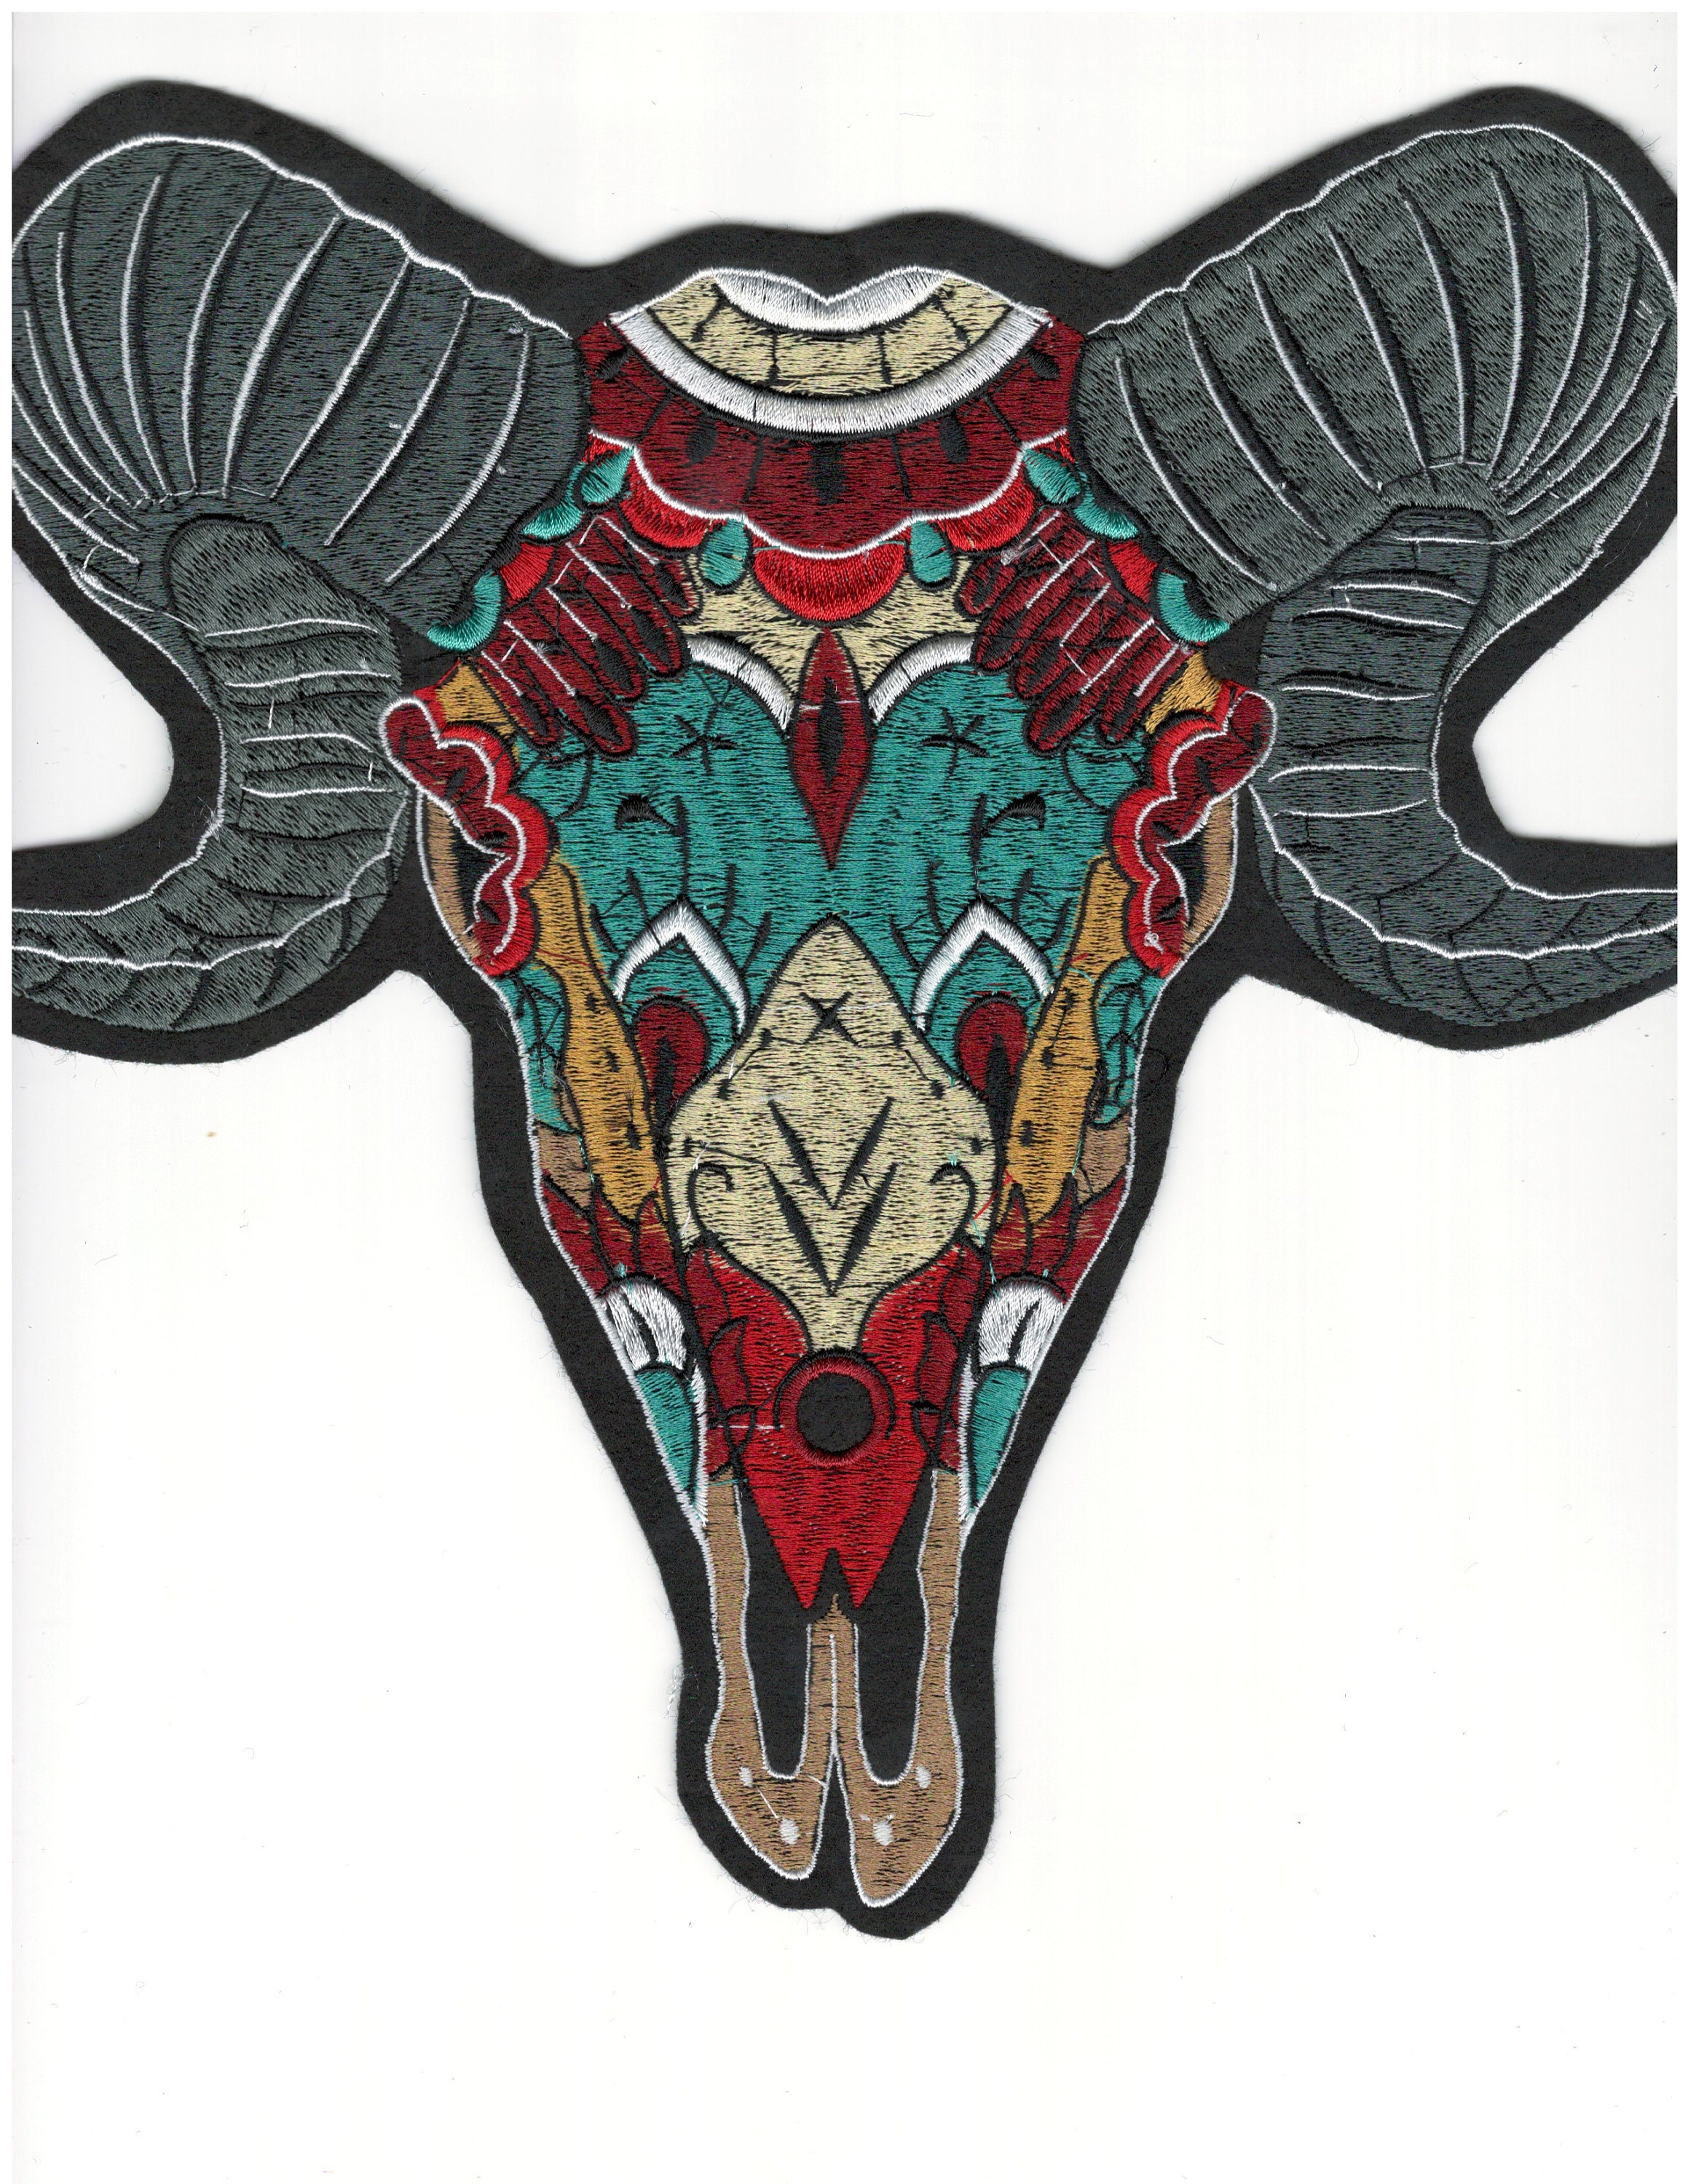 Large Colorful Rams Head Skull Iron-On Embroidered Patch -Big Sheep Embroidery For Clothes, Jackets, Backpacks -Iron On Back 101